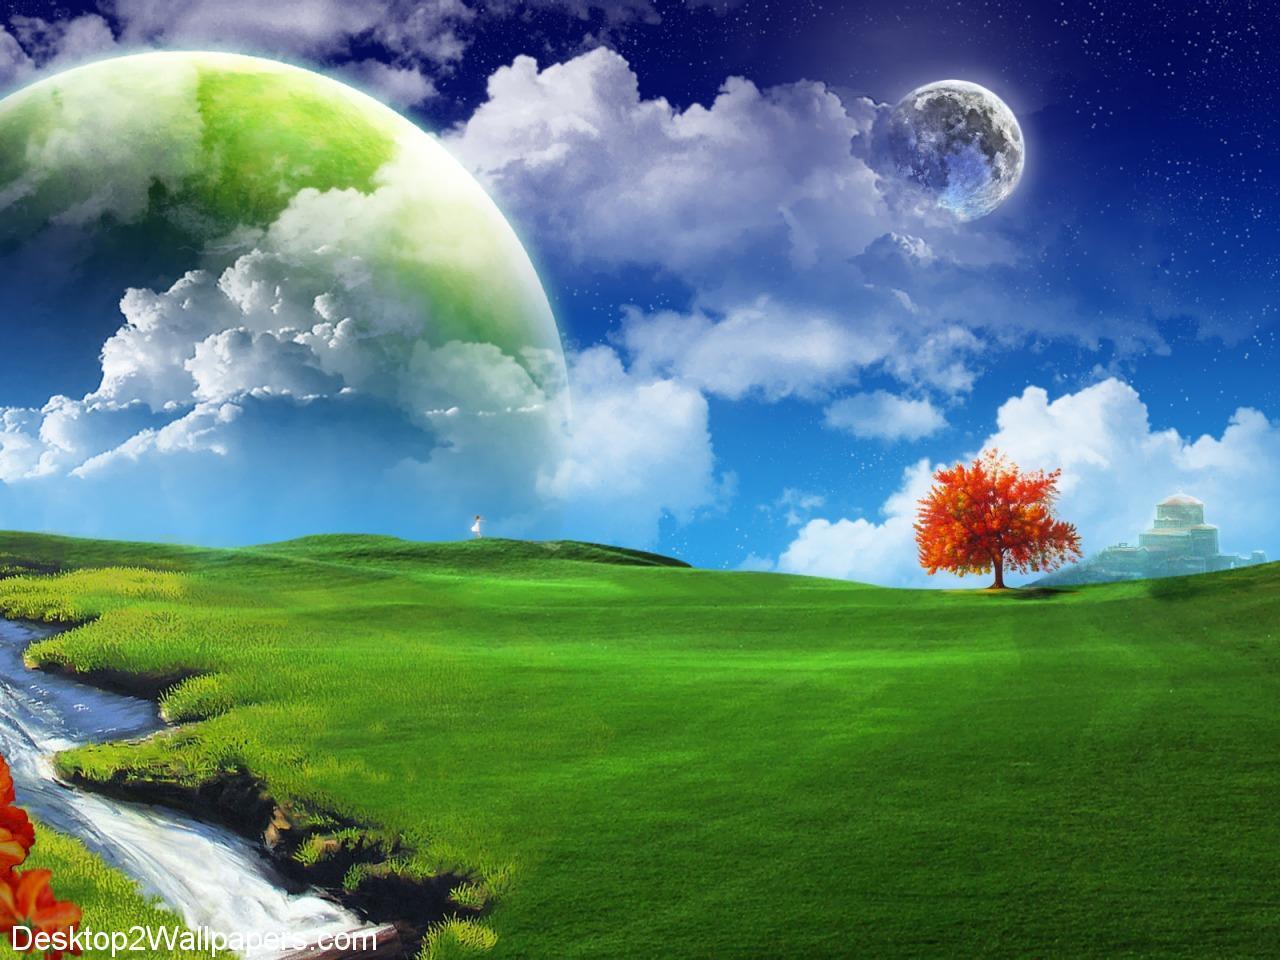 Green Planet Wallpapers Wallpaper Cave